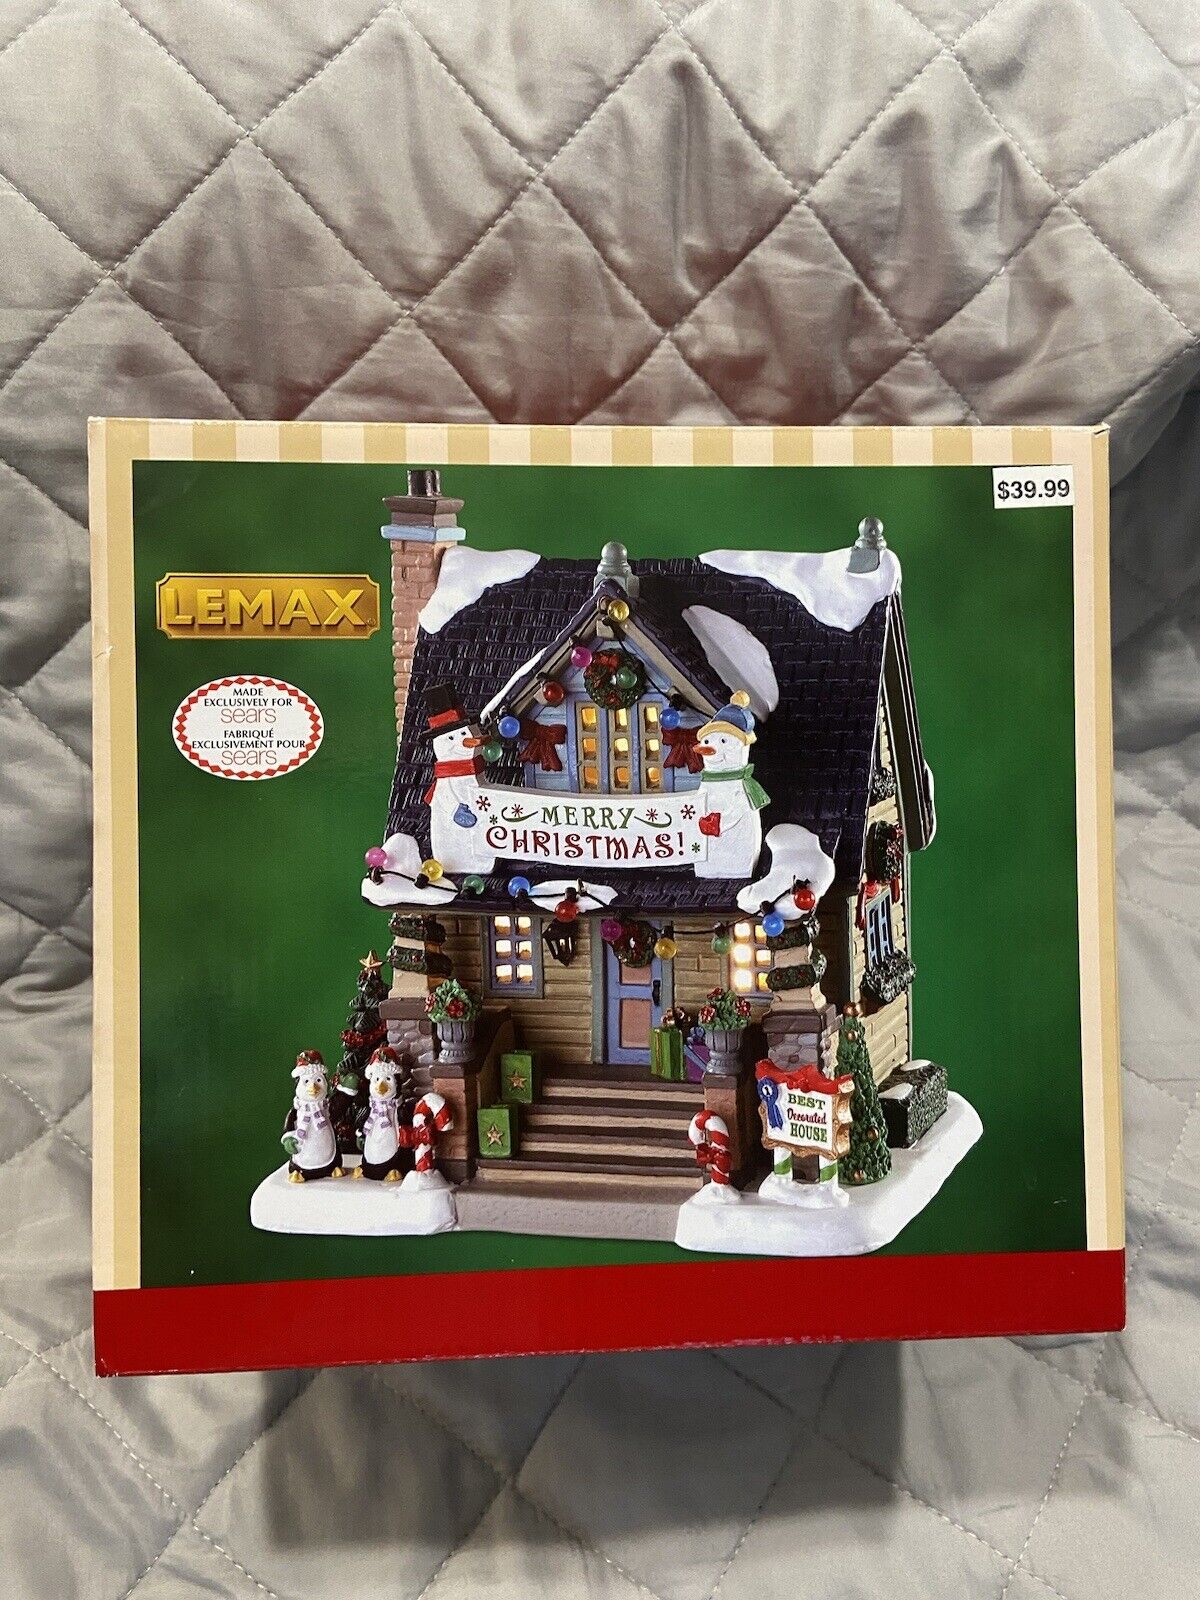 Lemax BEST DECORATED HOUSE Sears Exclusive Illuminated Building NIB